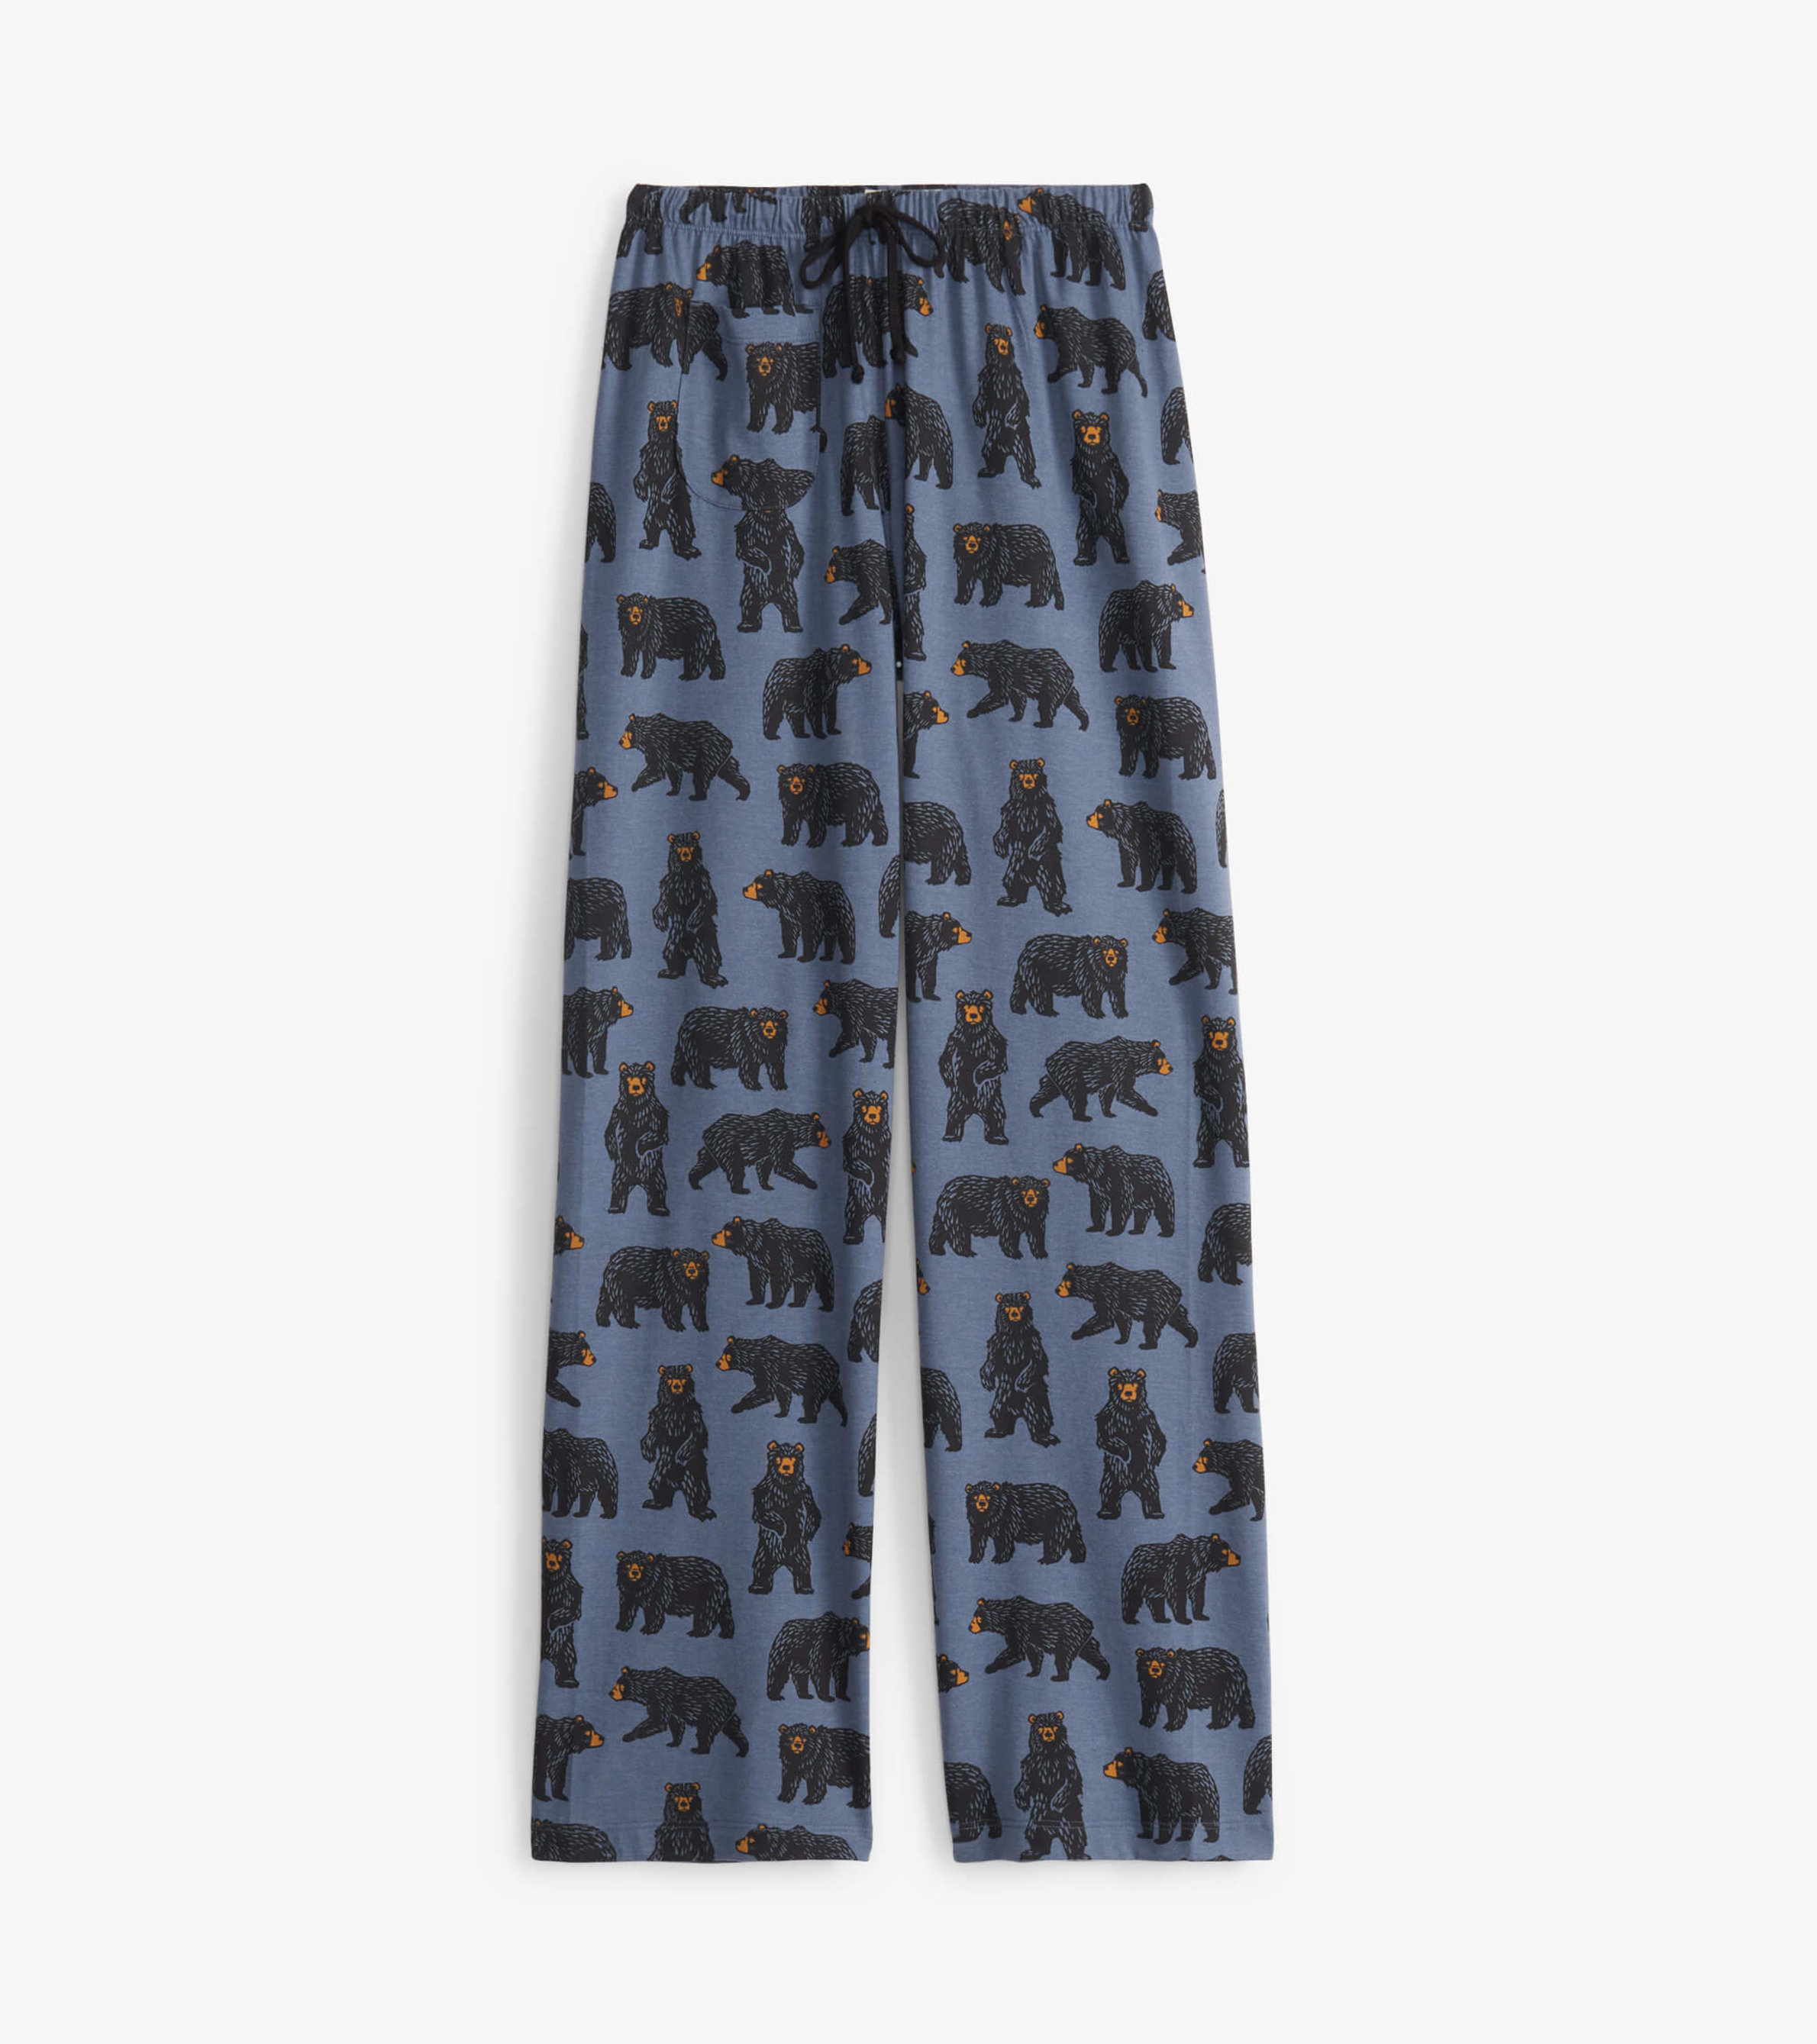 Country Living Women's Jersey Pajama Pants - Little Blue House US